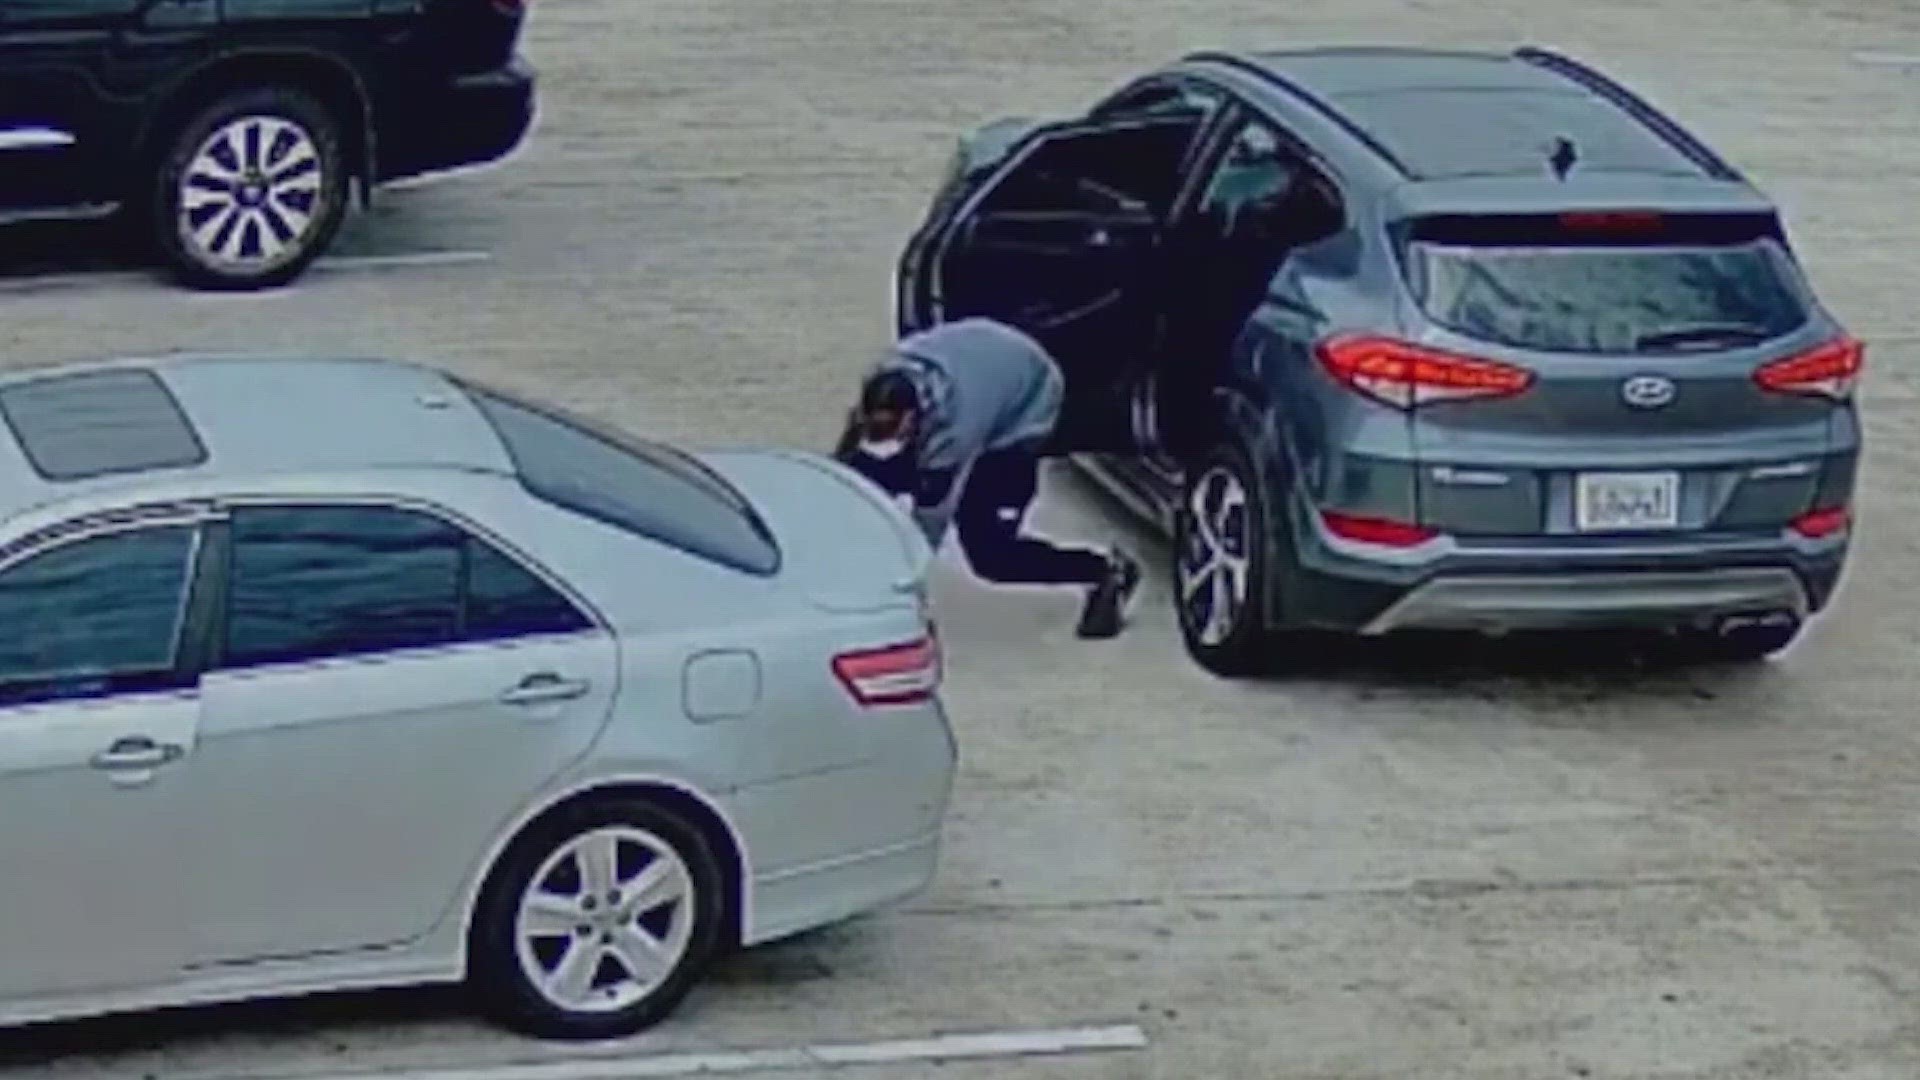 In Houston, there have been several thieves caught on camera creeping up on people's cars and stealing their belongings. Most victims are women and their purses.